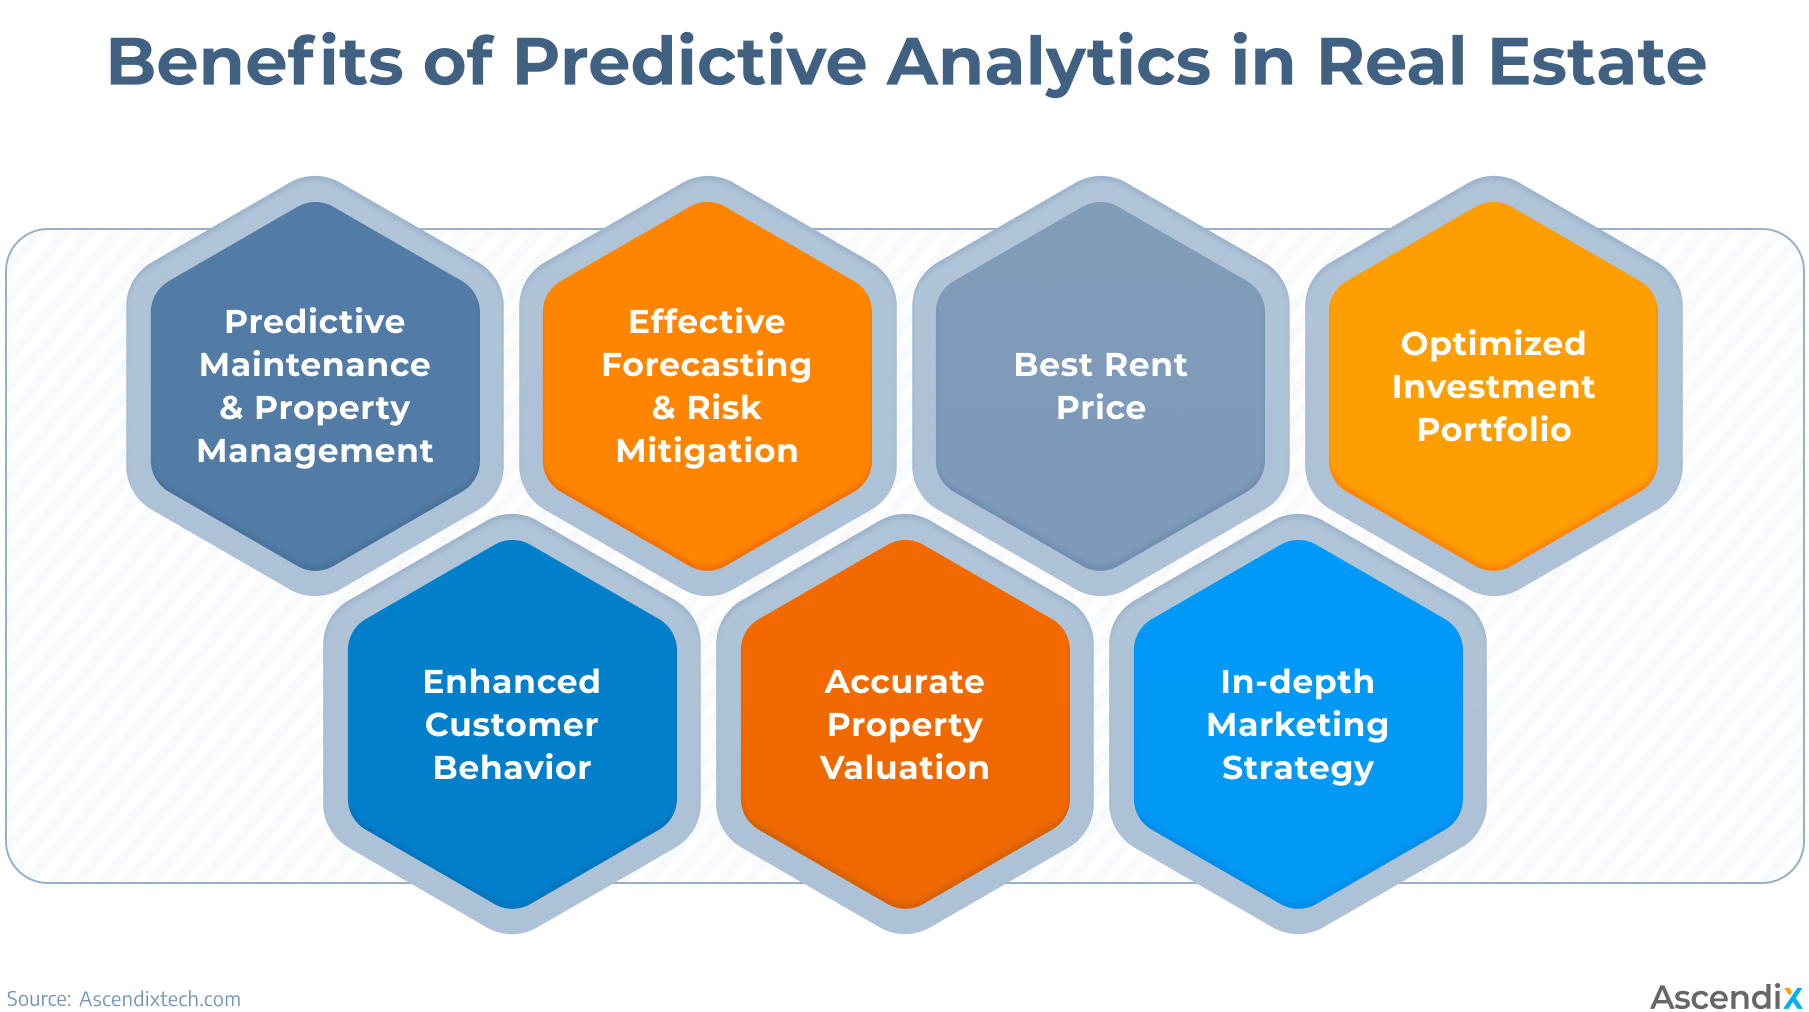 Benefits of predictive analytics in real estate